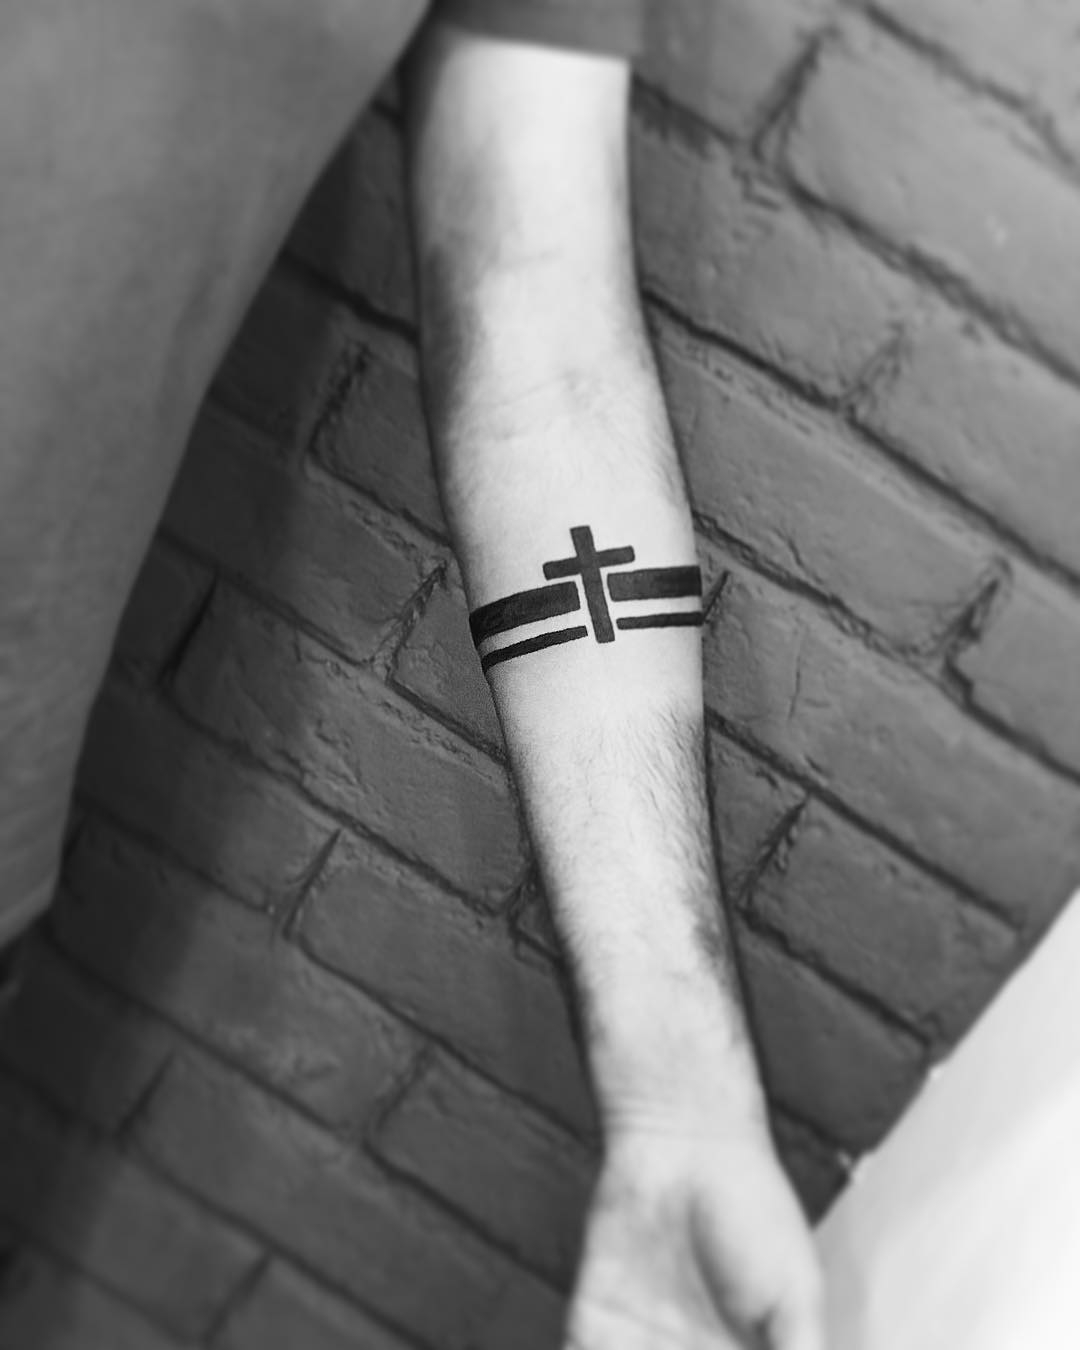 225 Best Cross Tattoo Designs With Meanings regarding sizing 1080 X 1350